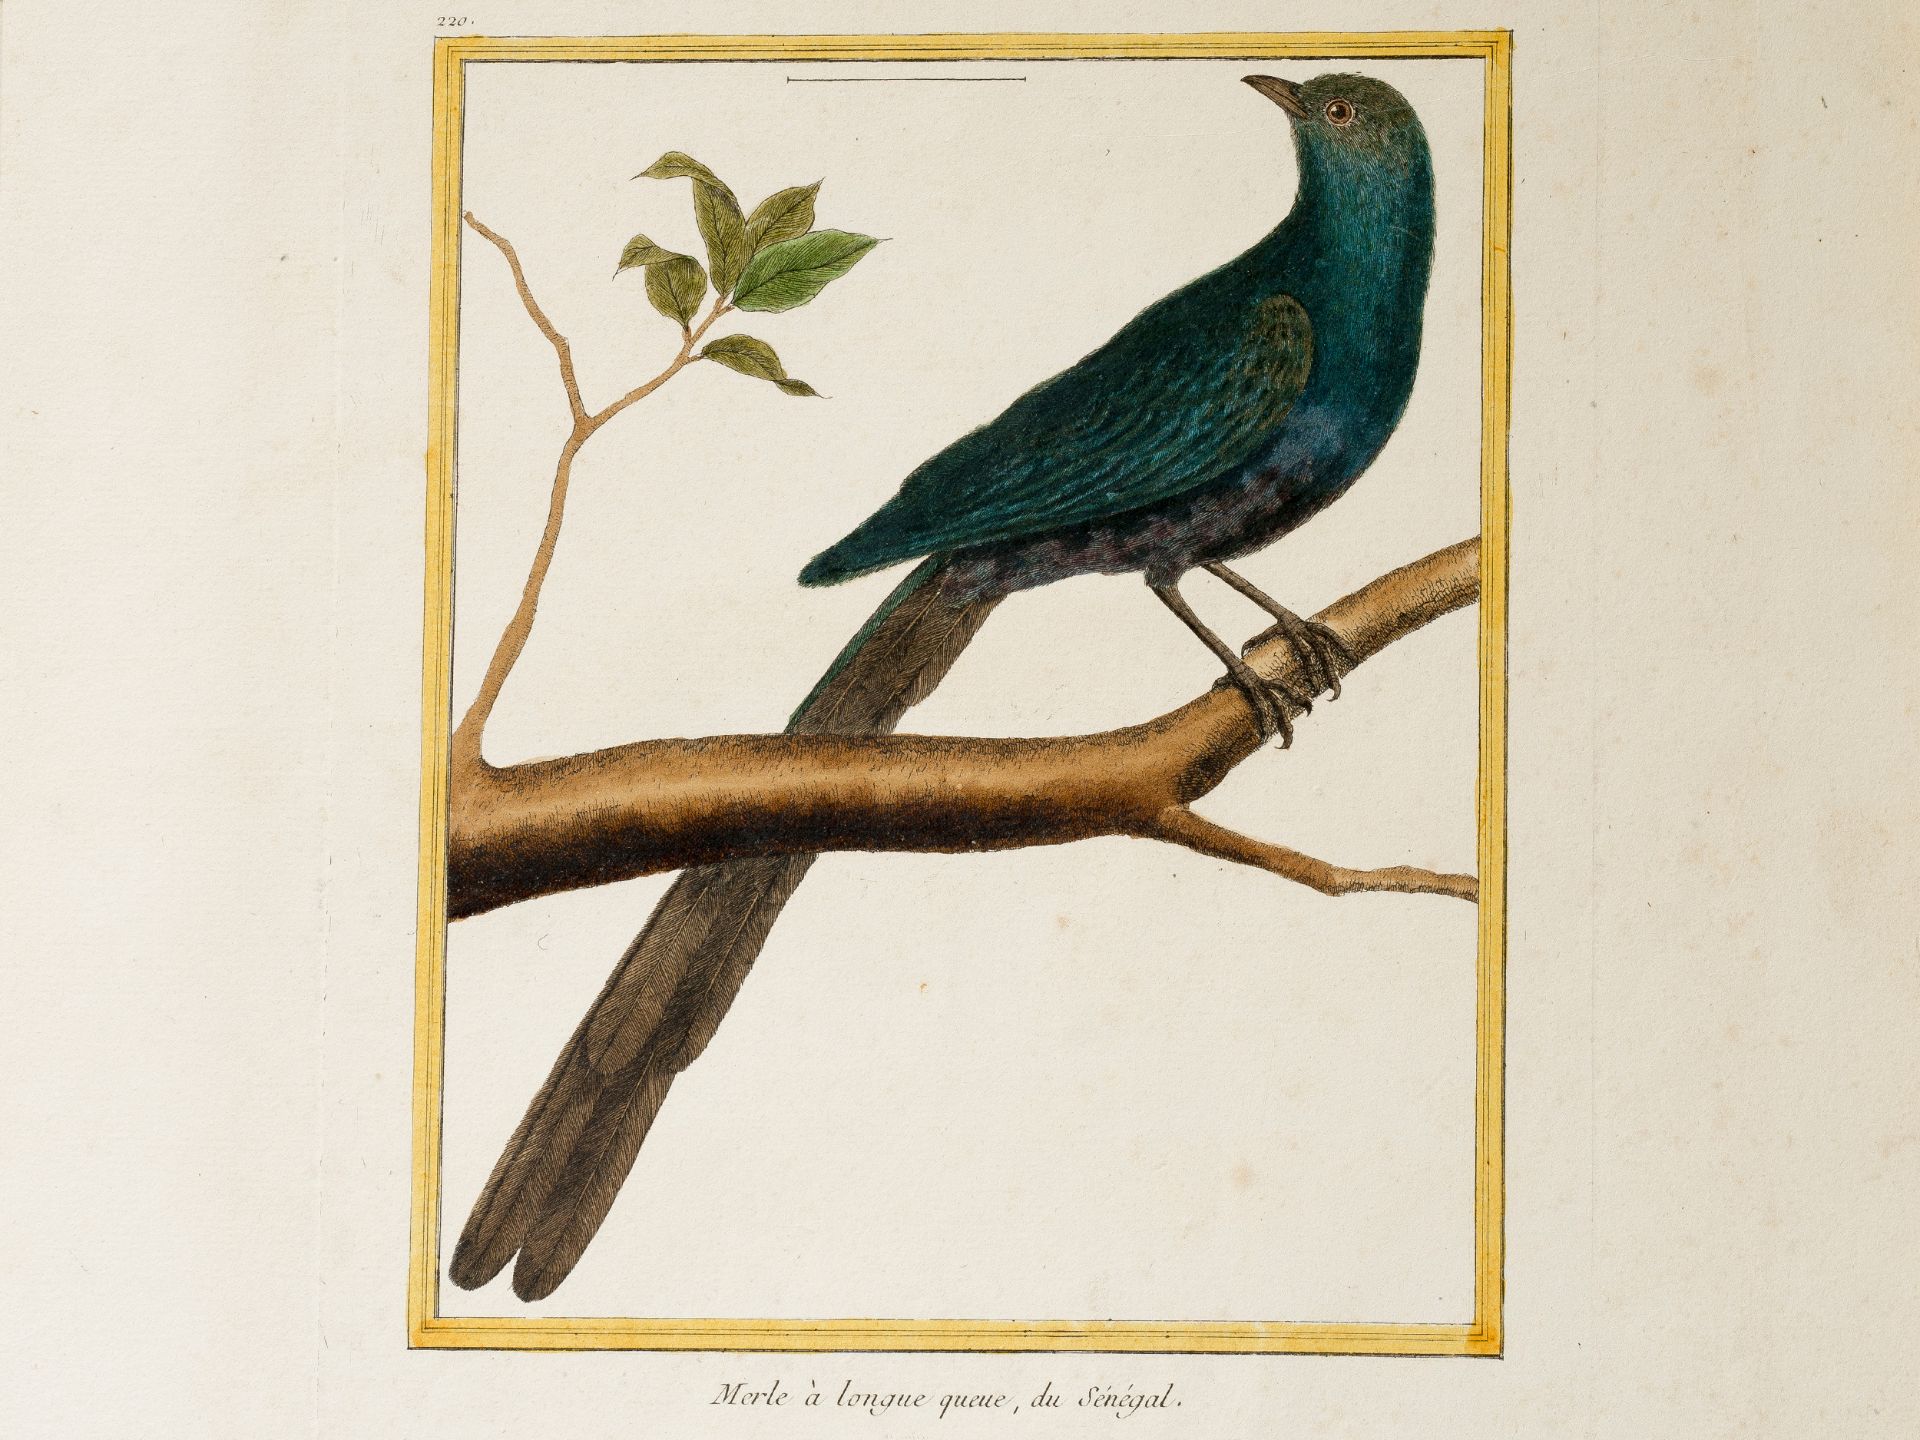 "Merle à longue queue, du Sénégal", From a French treatise on bird species, Coloured engraving